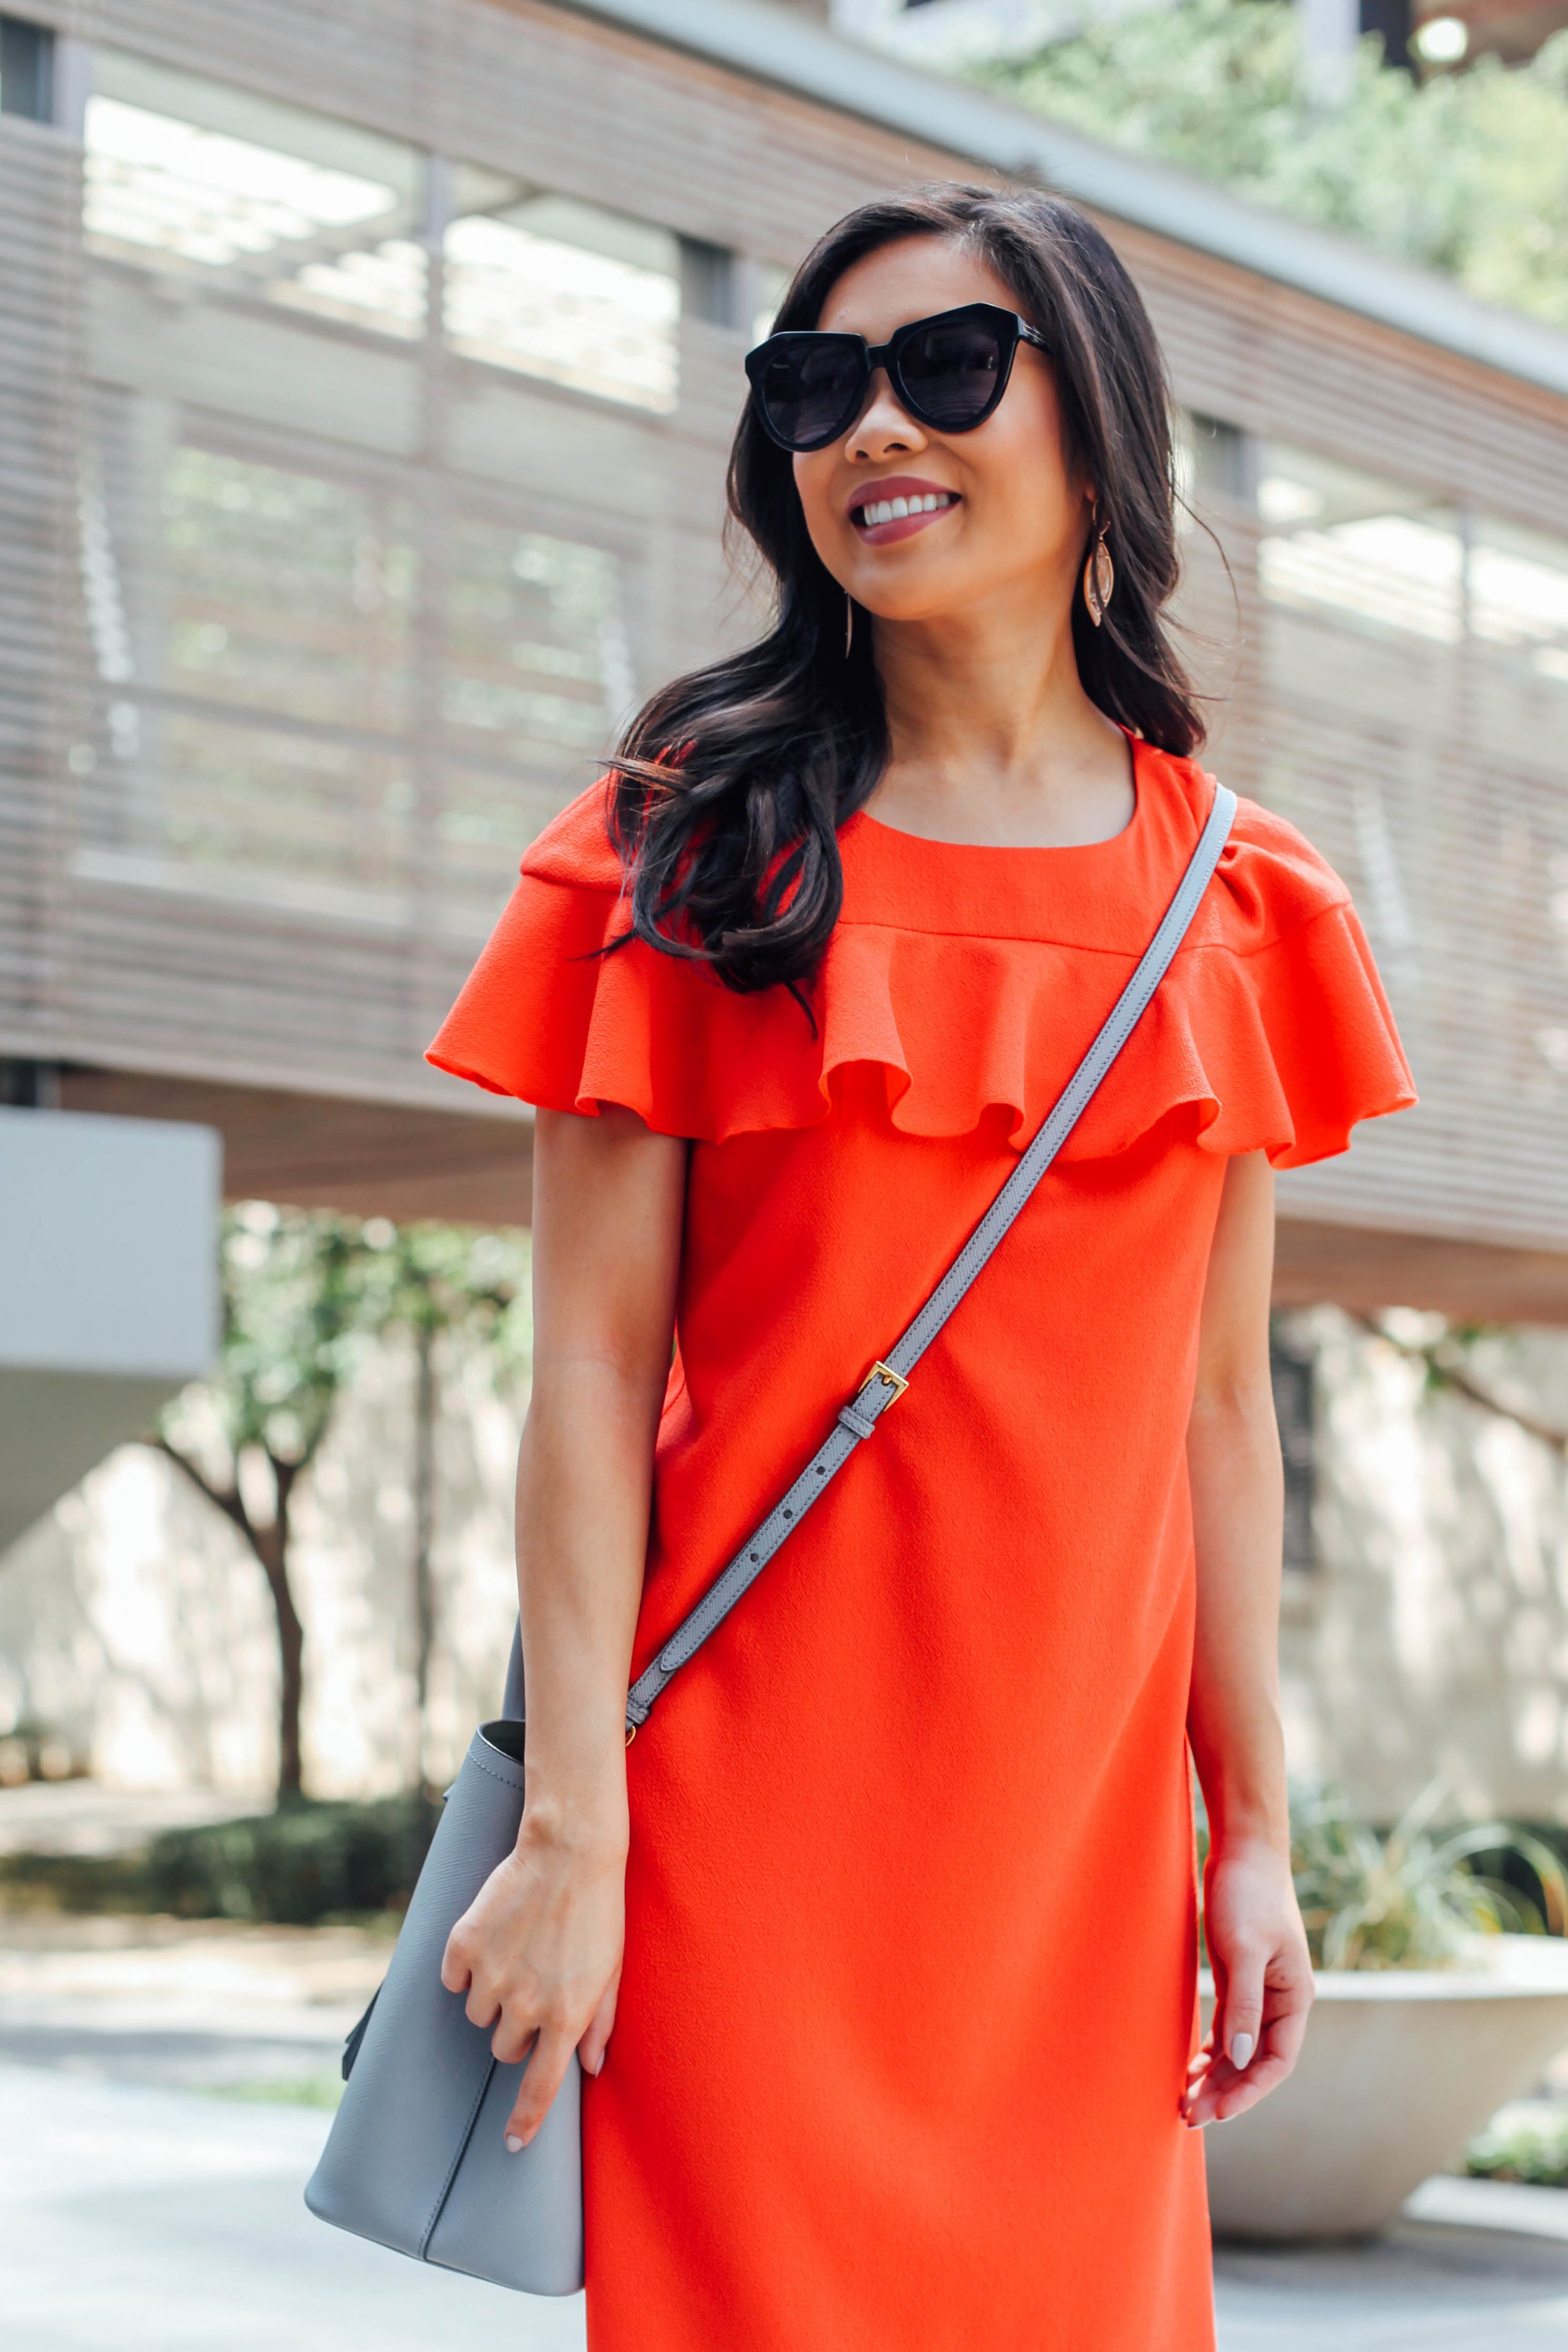 Blogger Hoang-Kim wears a bright orange ruffle dress for spring